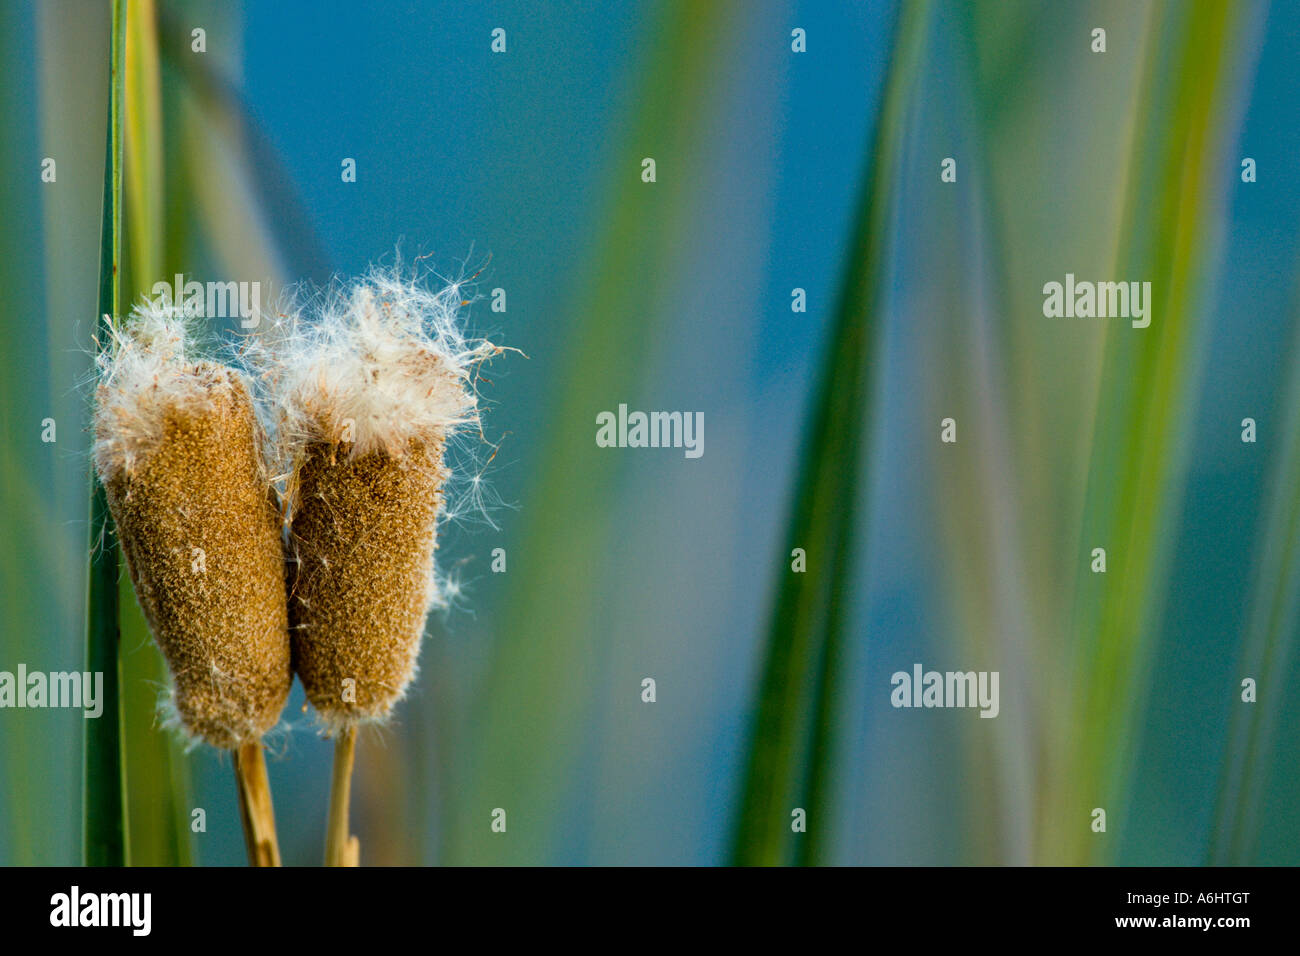 Tule Cattail Typha domingensis Stock Photo